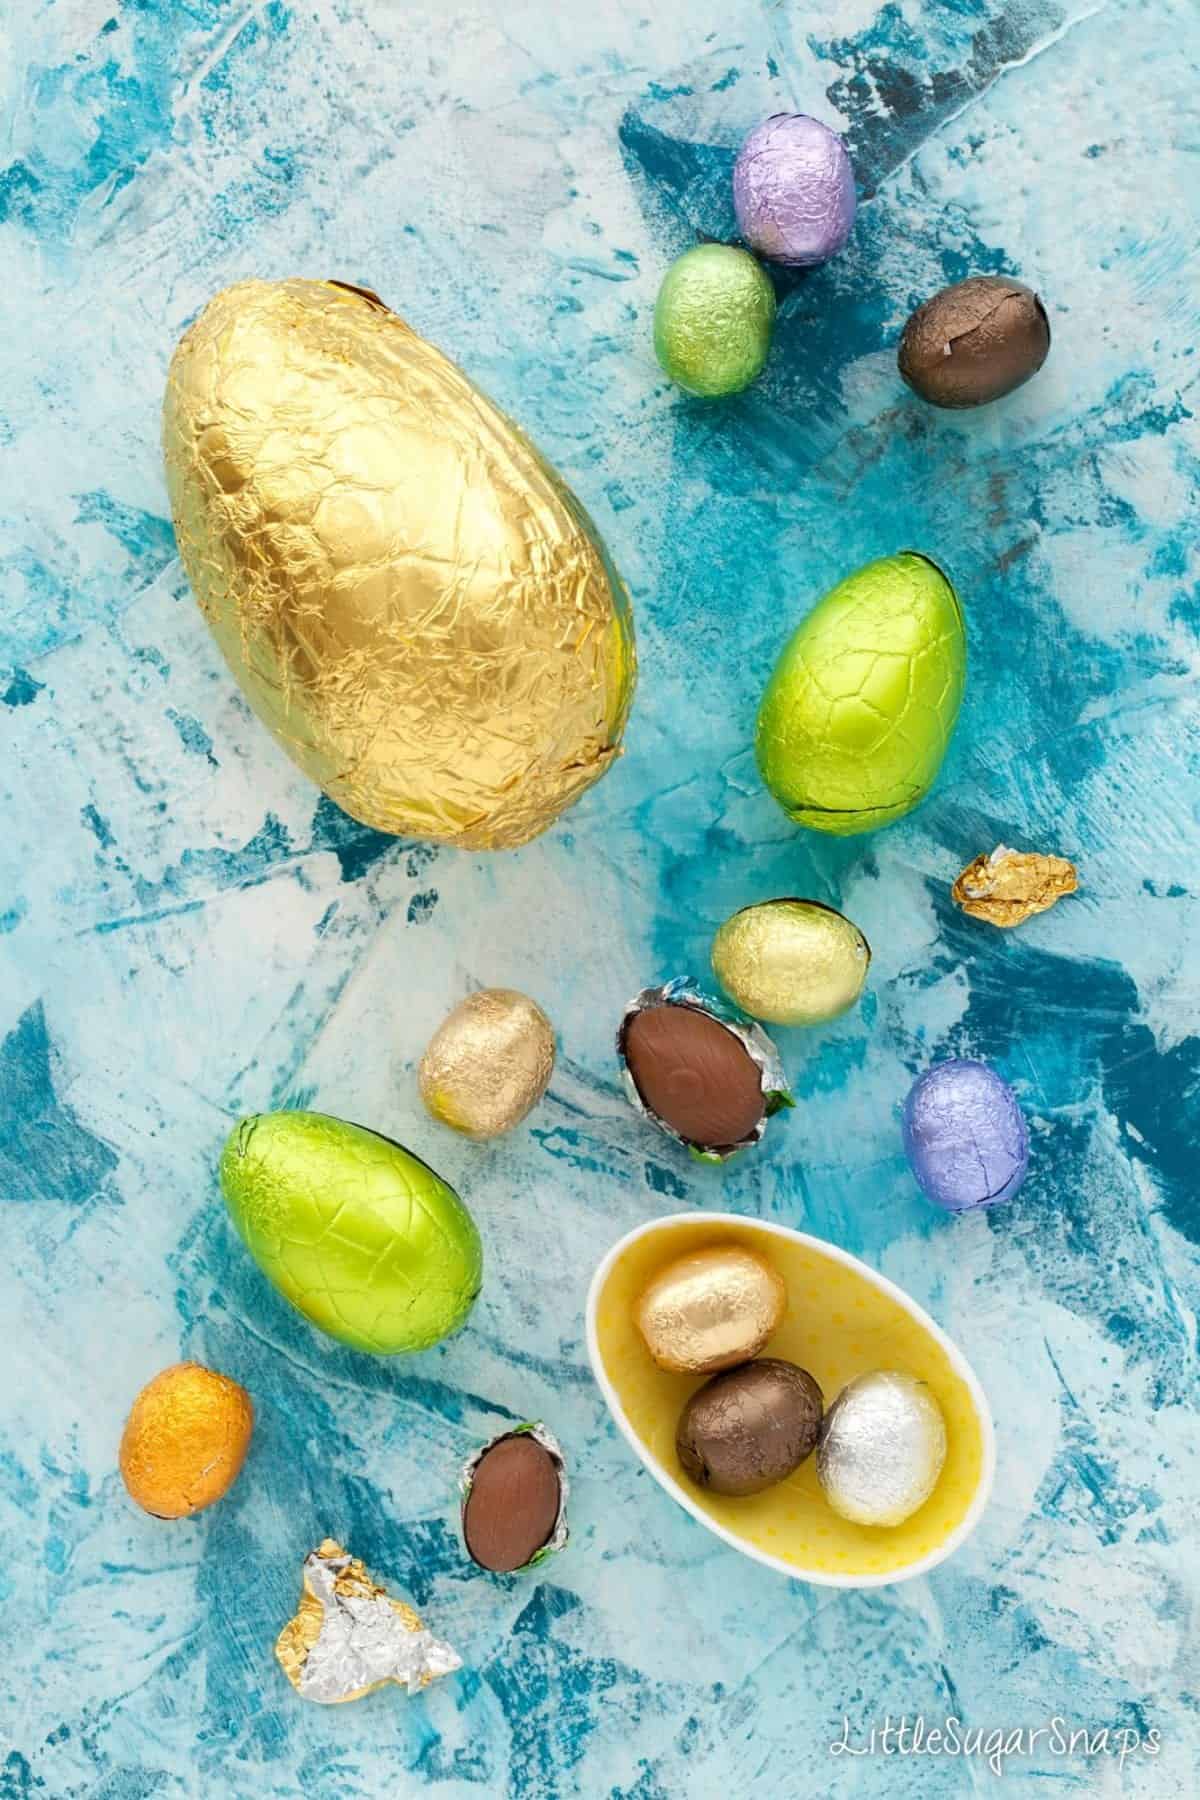 Various foil wrapped chocolate eggs on a blue tabletop